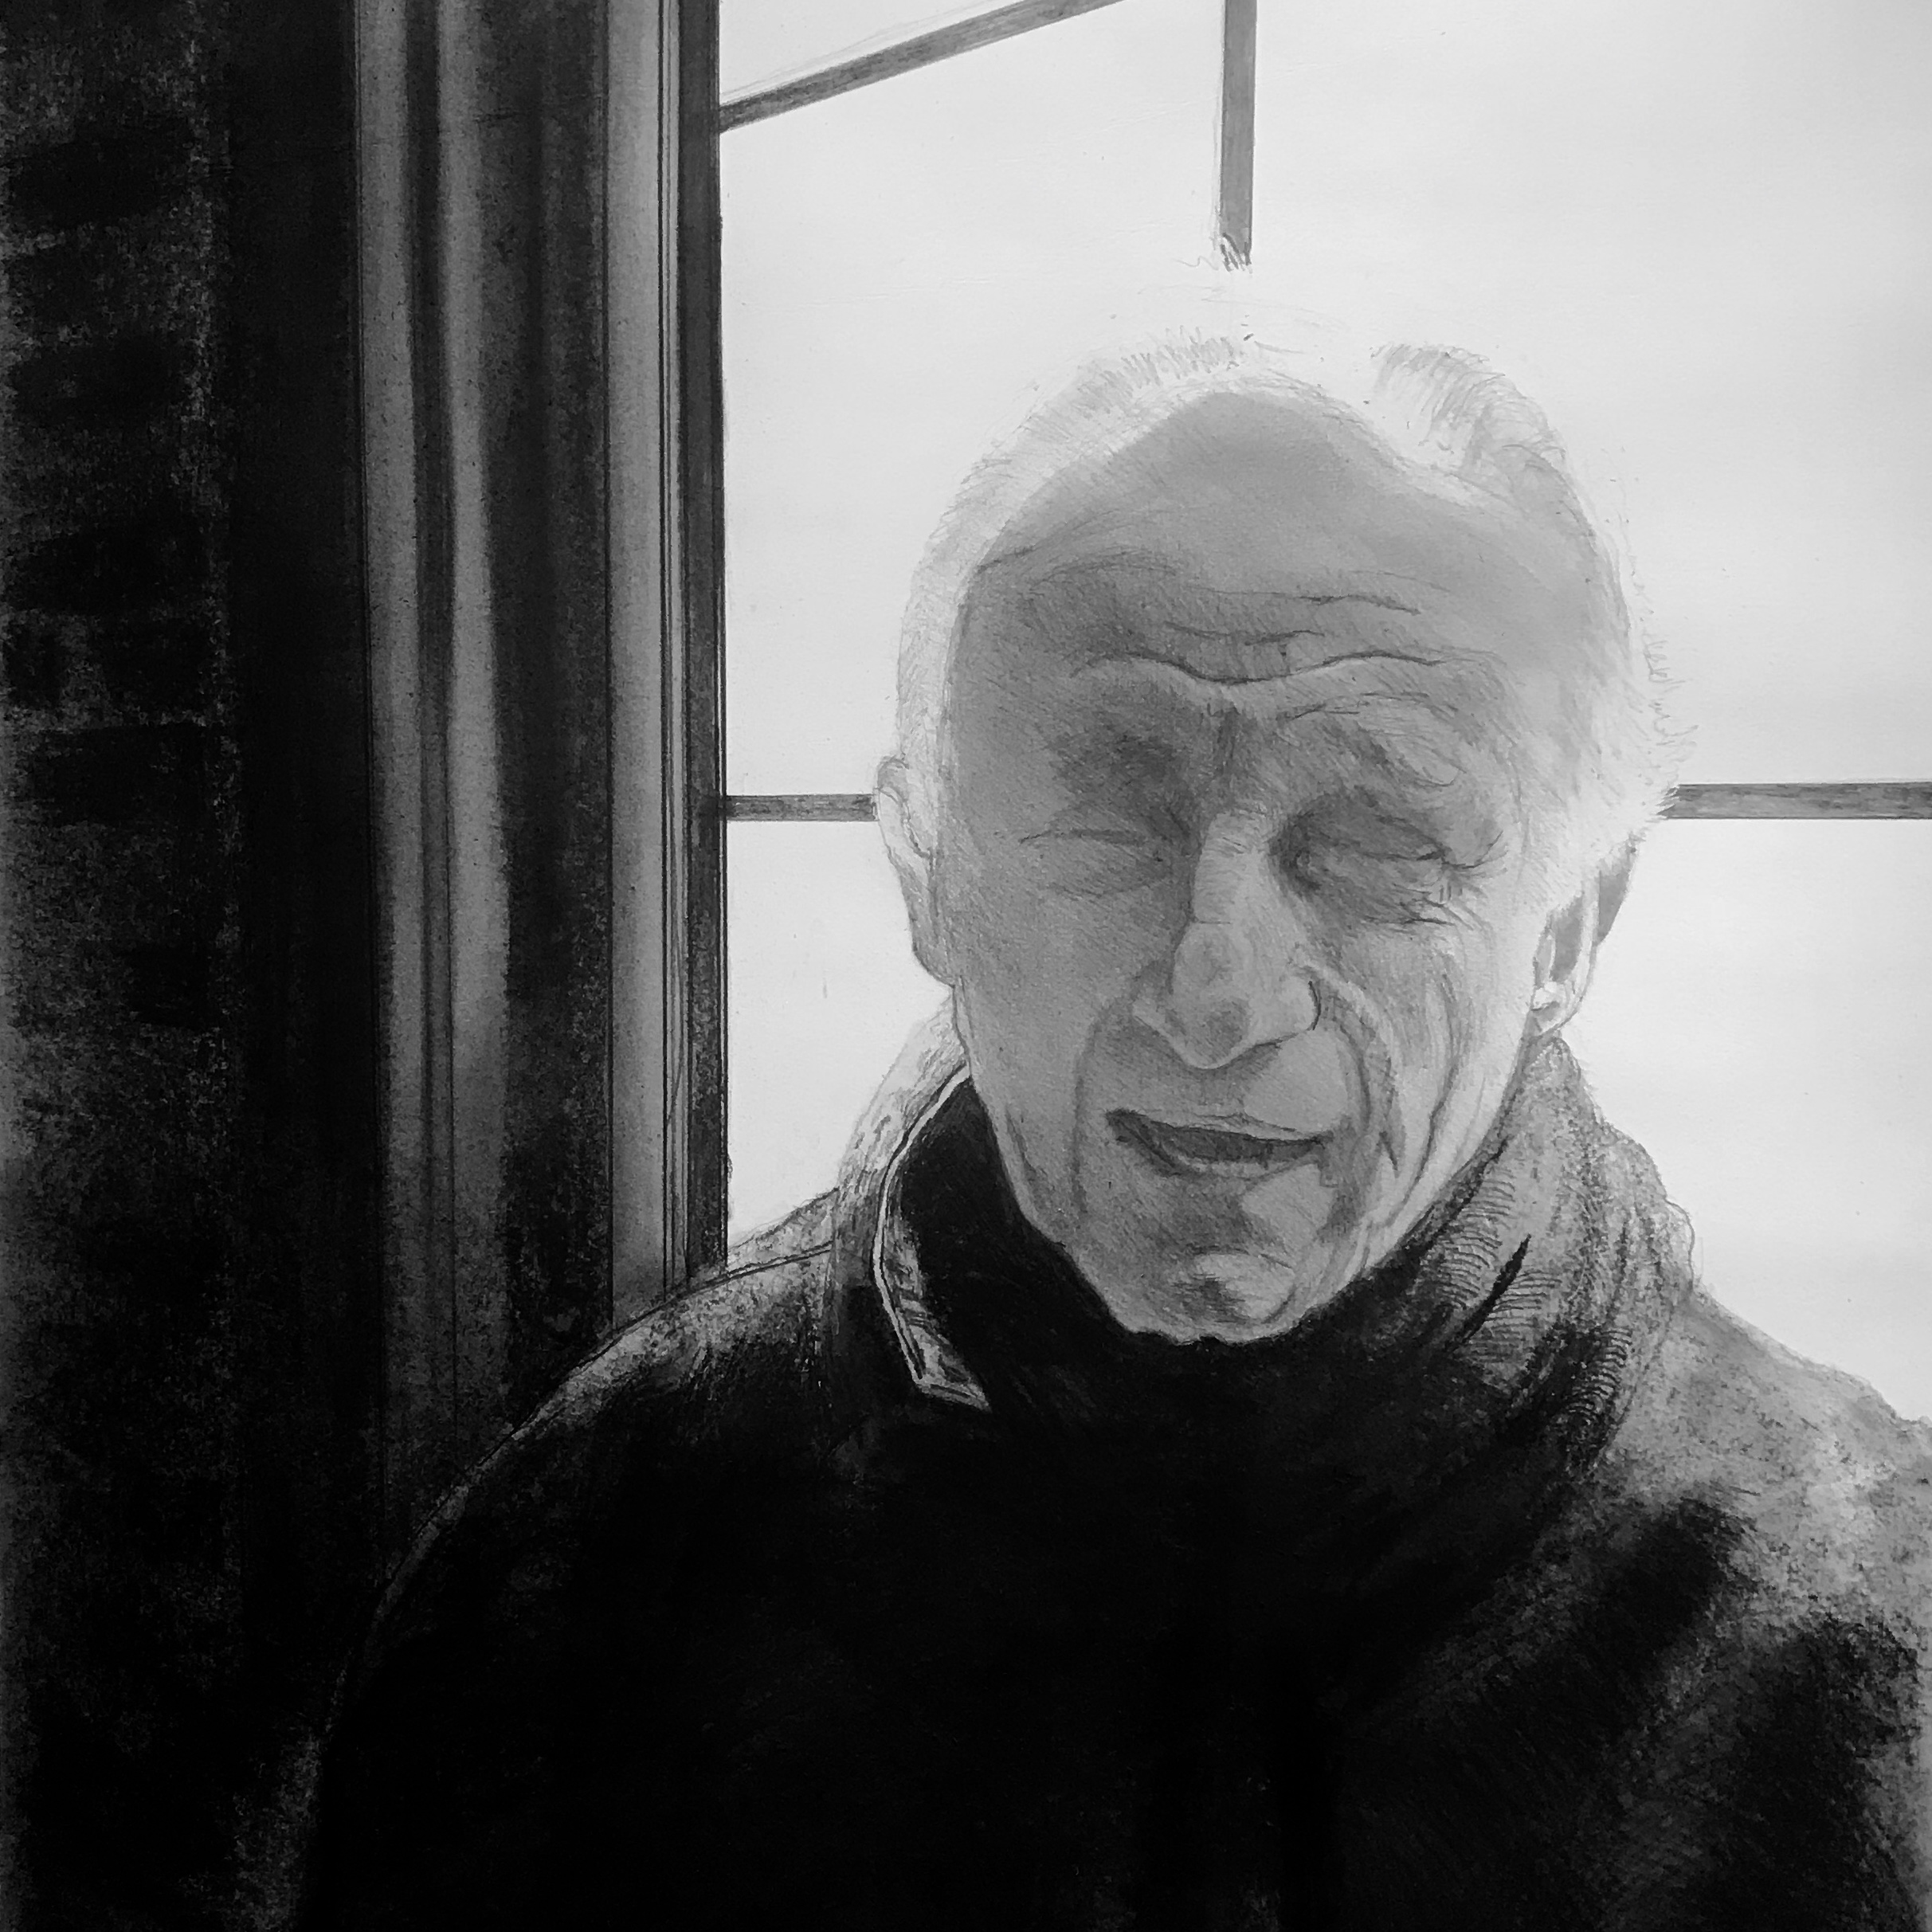 Man in front of a window